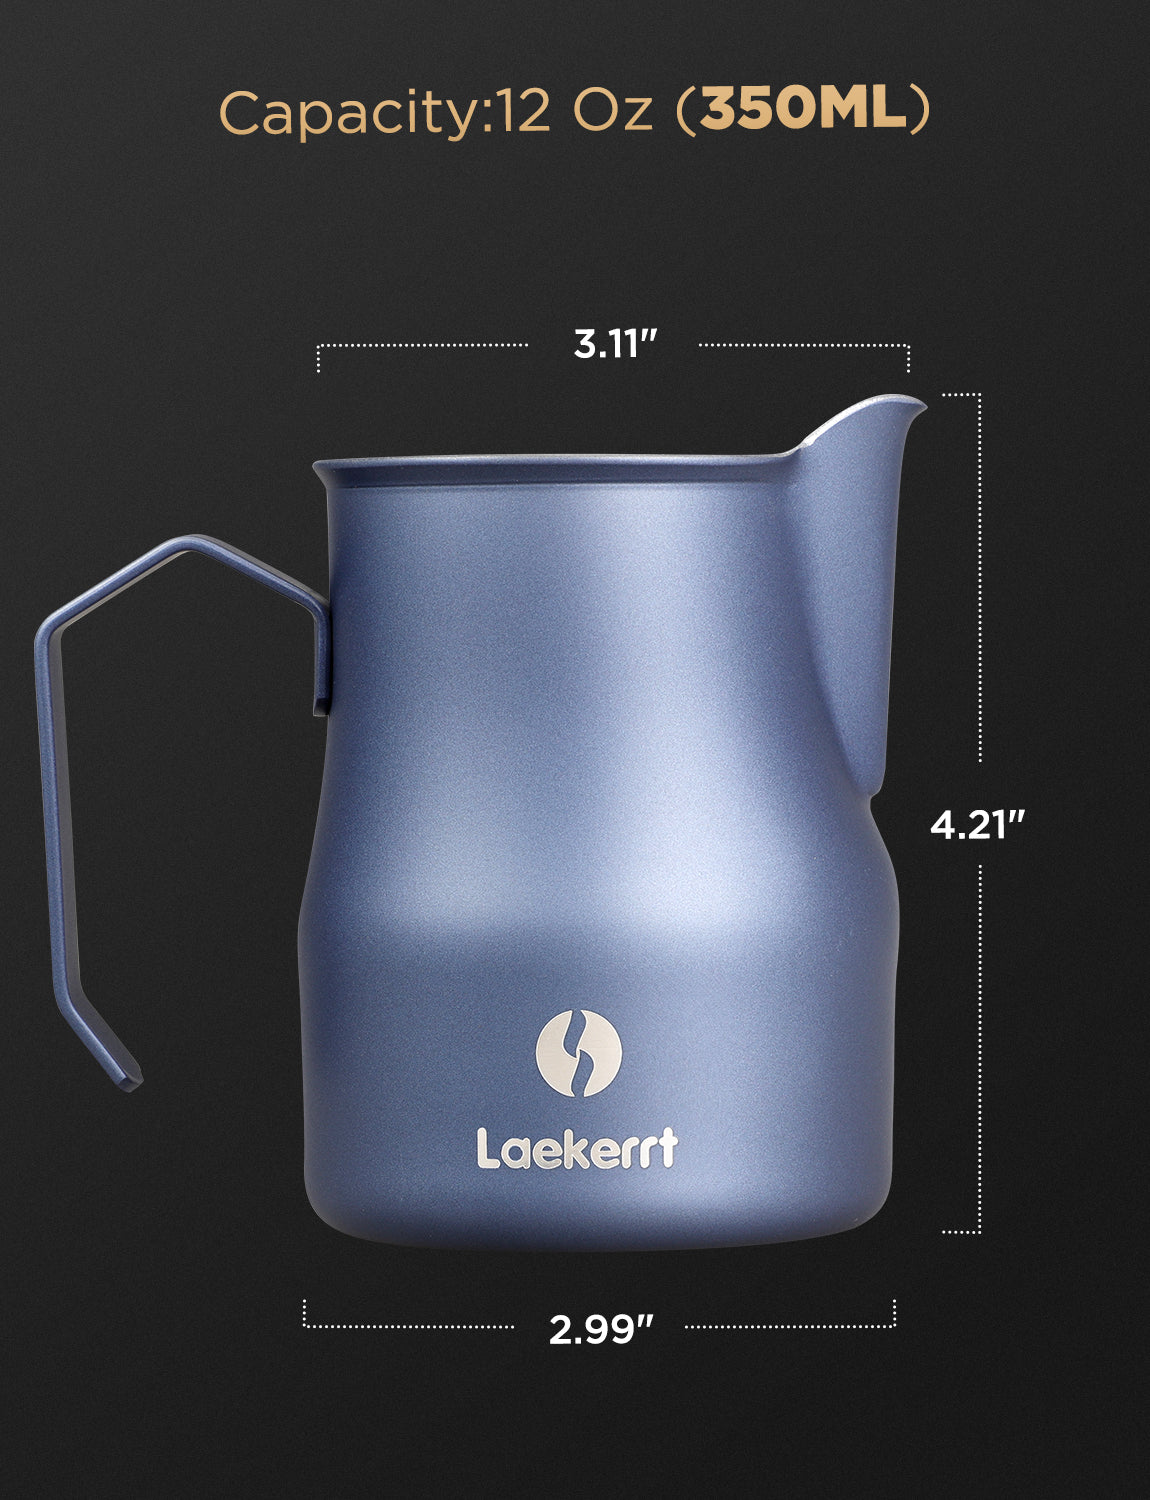 Laekerrt Milk Frothing Pitcher, Stainless Steel Coffee Tools Cup, Milk Frother Cup, Coffee Steaming Pitcher, Perfect Espresso Machine Accessories, Barista Tools, Latte Art, Navy Blue 12 Oz (350ml)